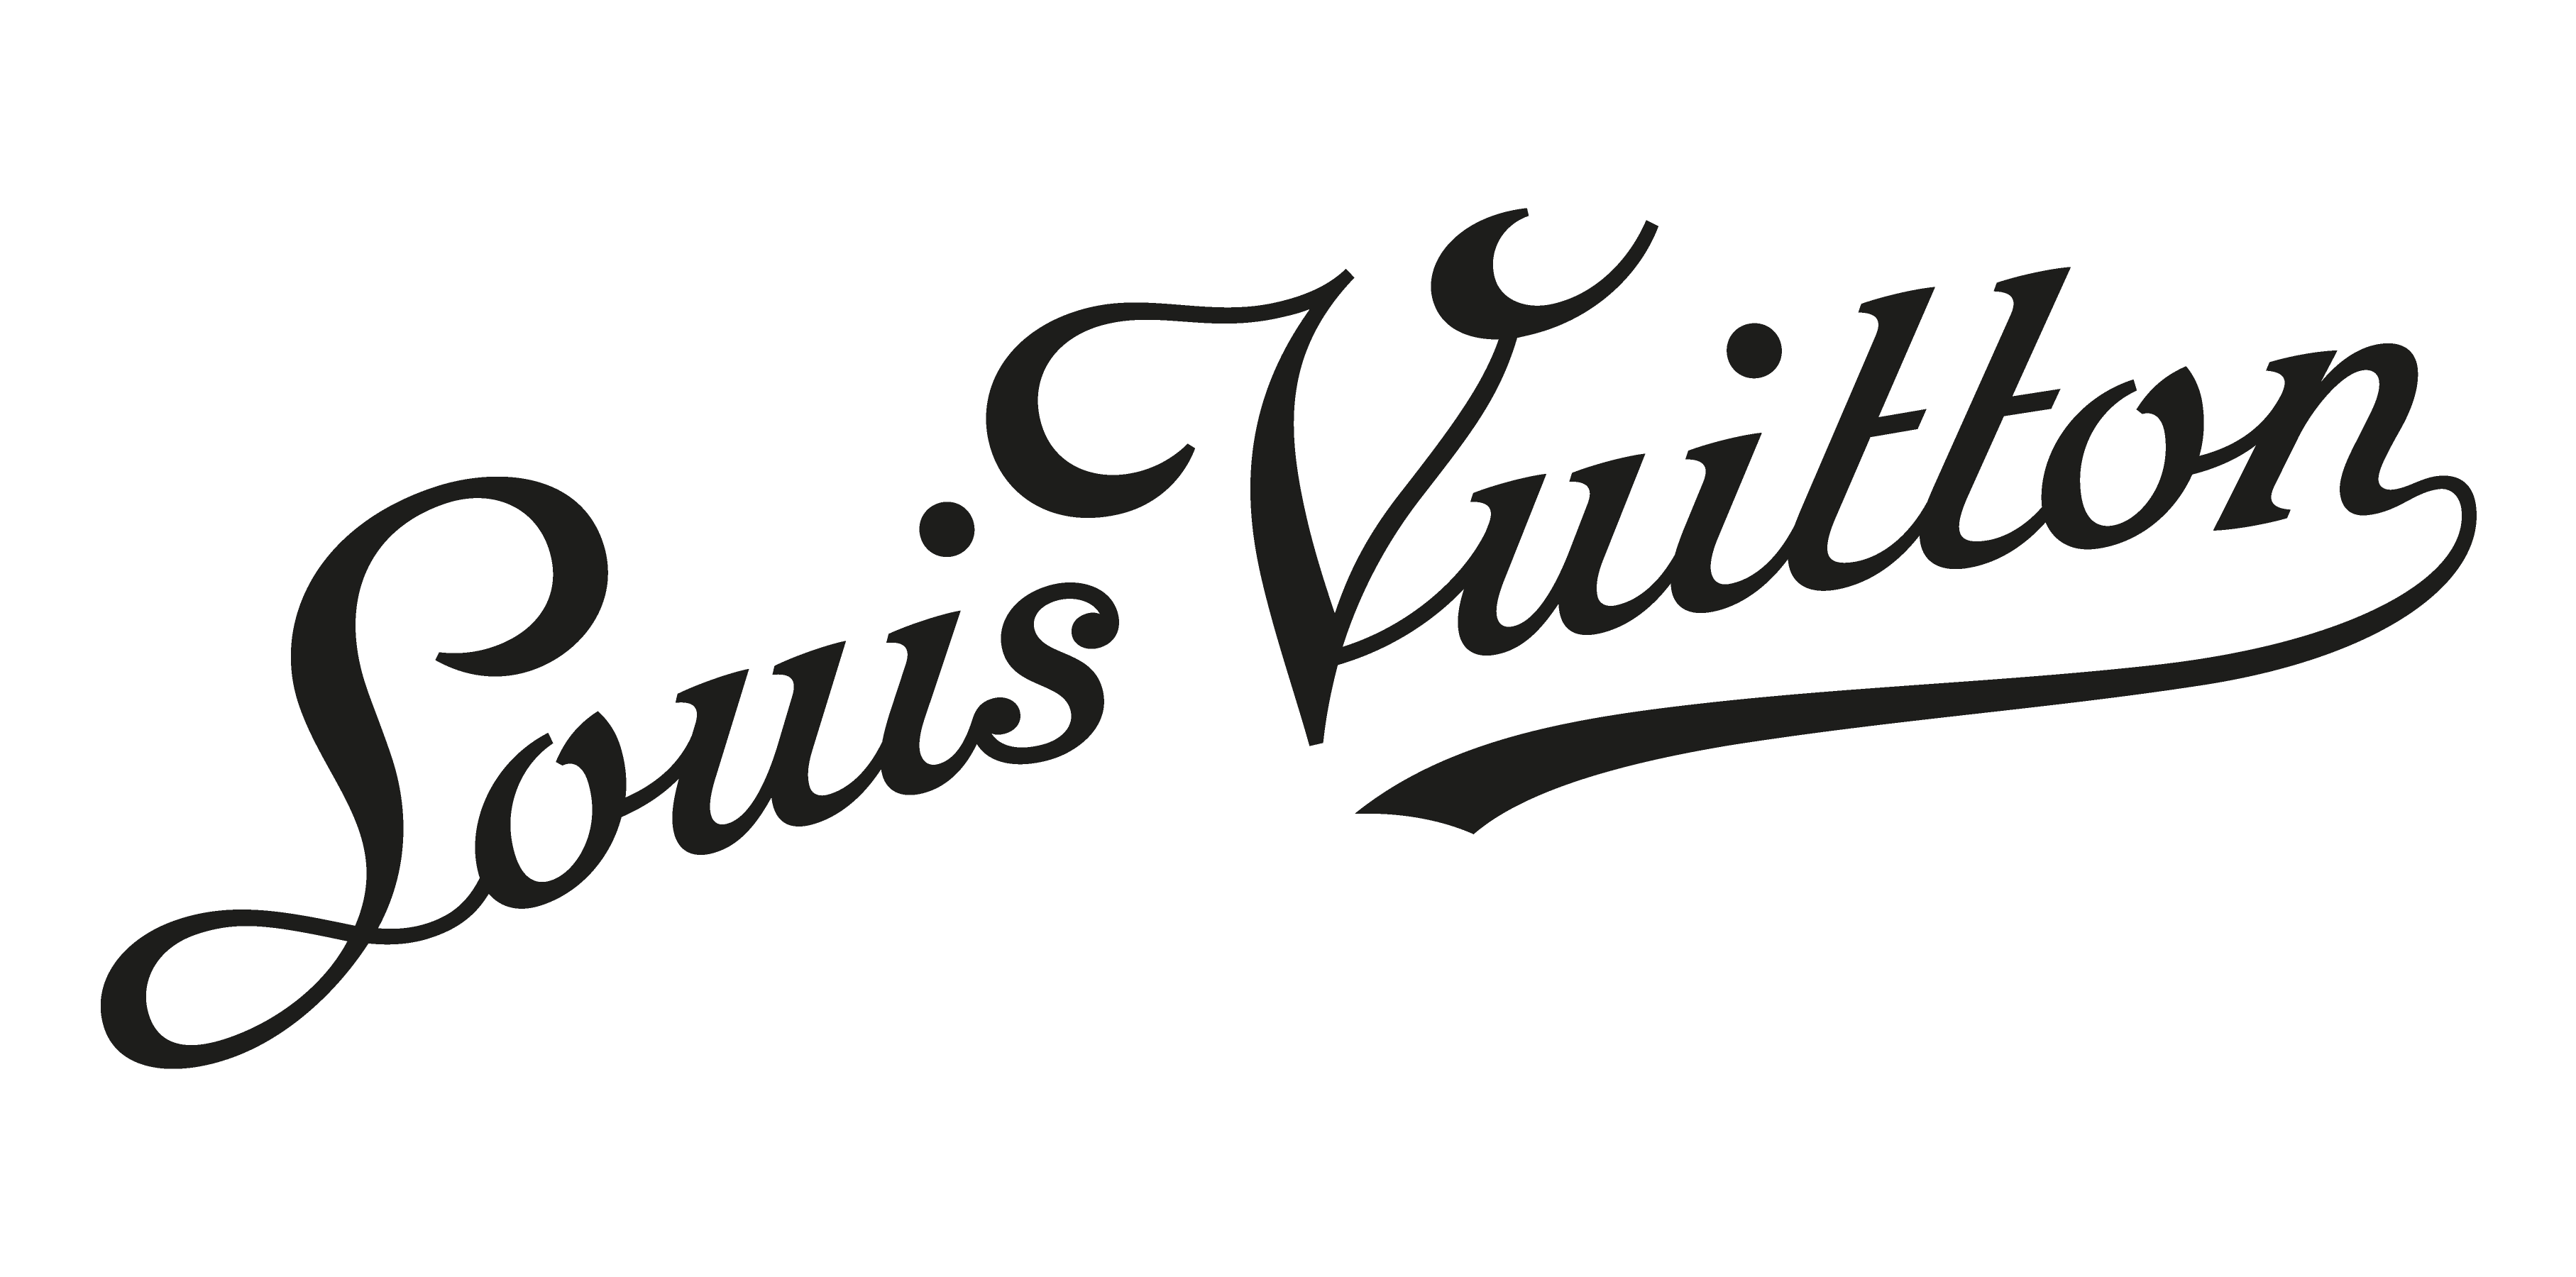 Download Louis Vuitton (LV) Logo in SVG Vector or PNG File Format 